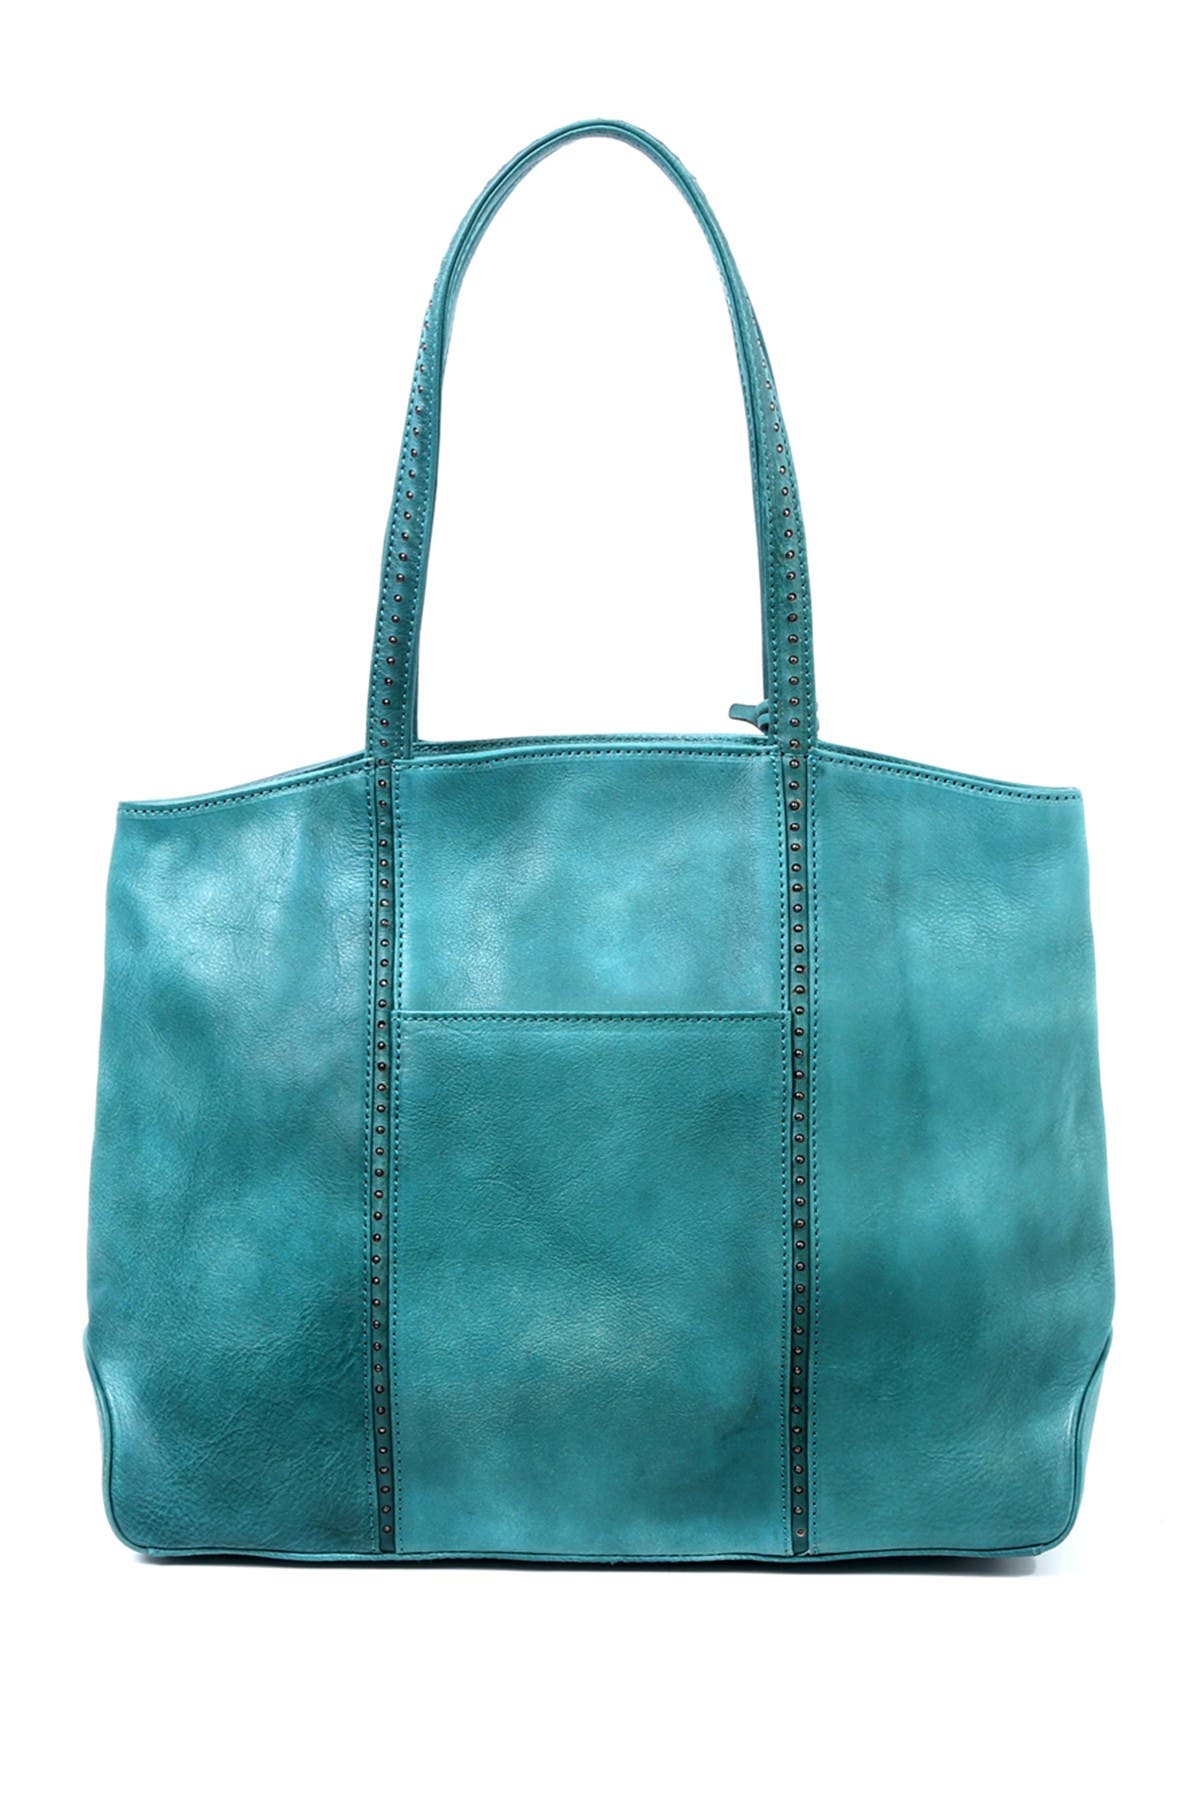 Old Trend Dancing Bamboo Leather Tote Bag In Turquoise/aqua